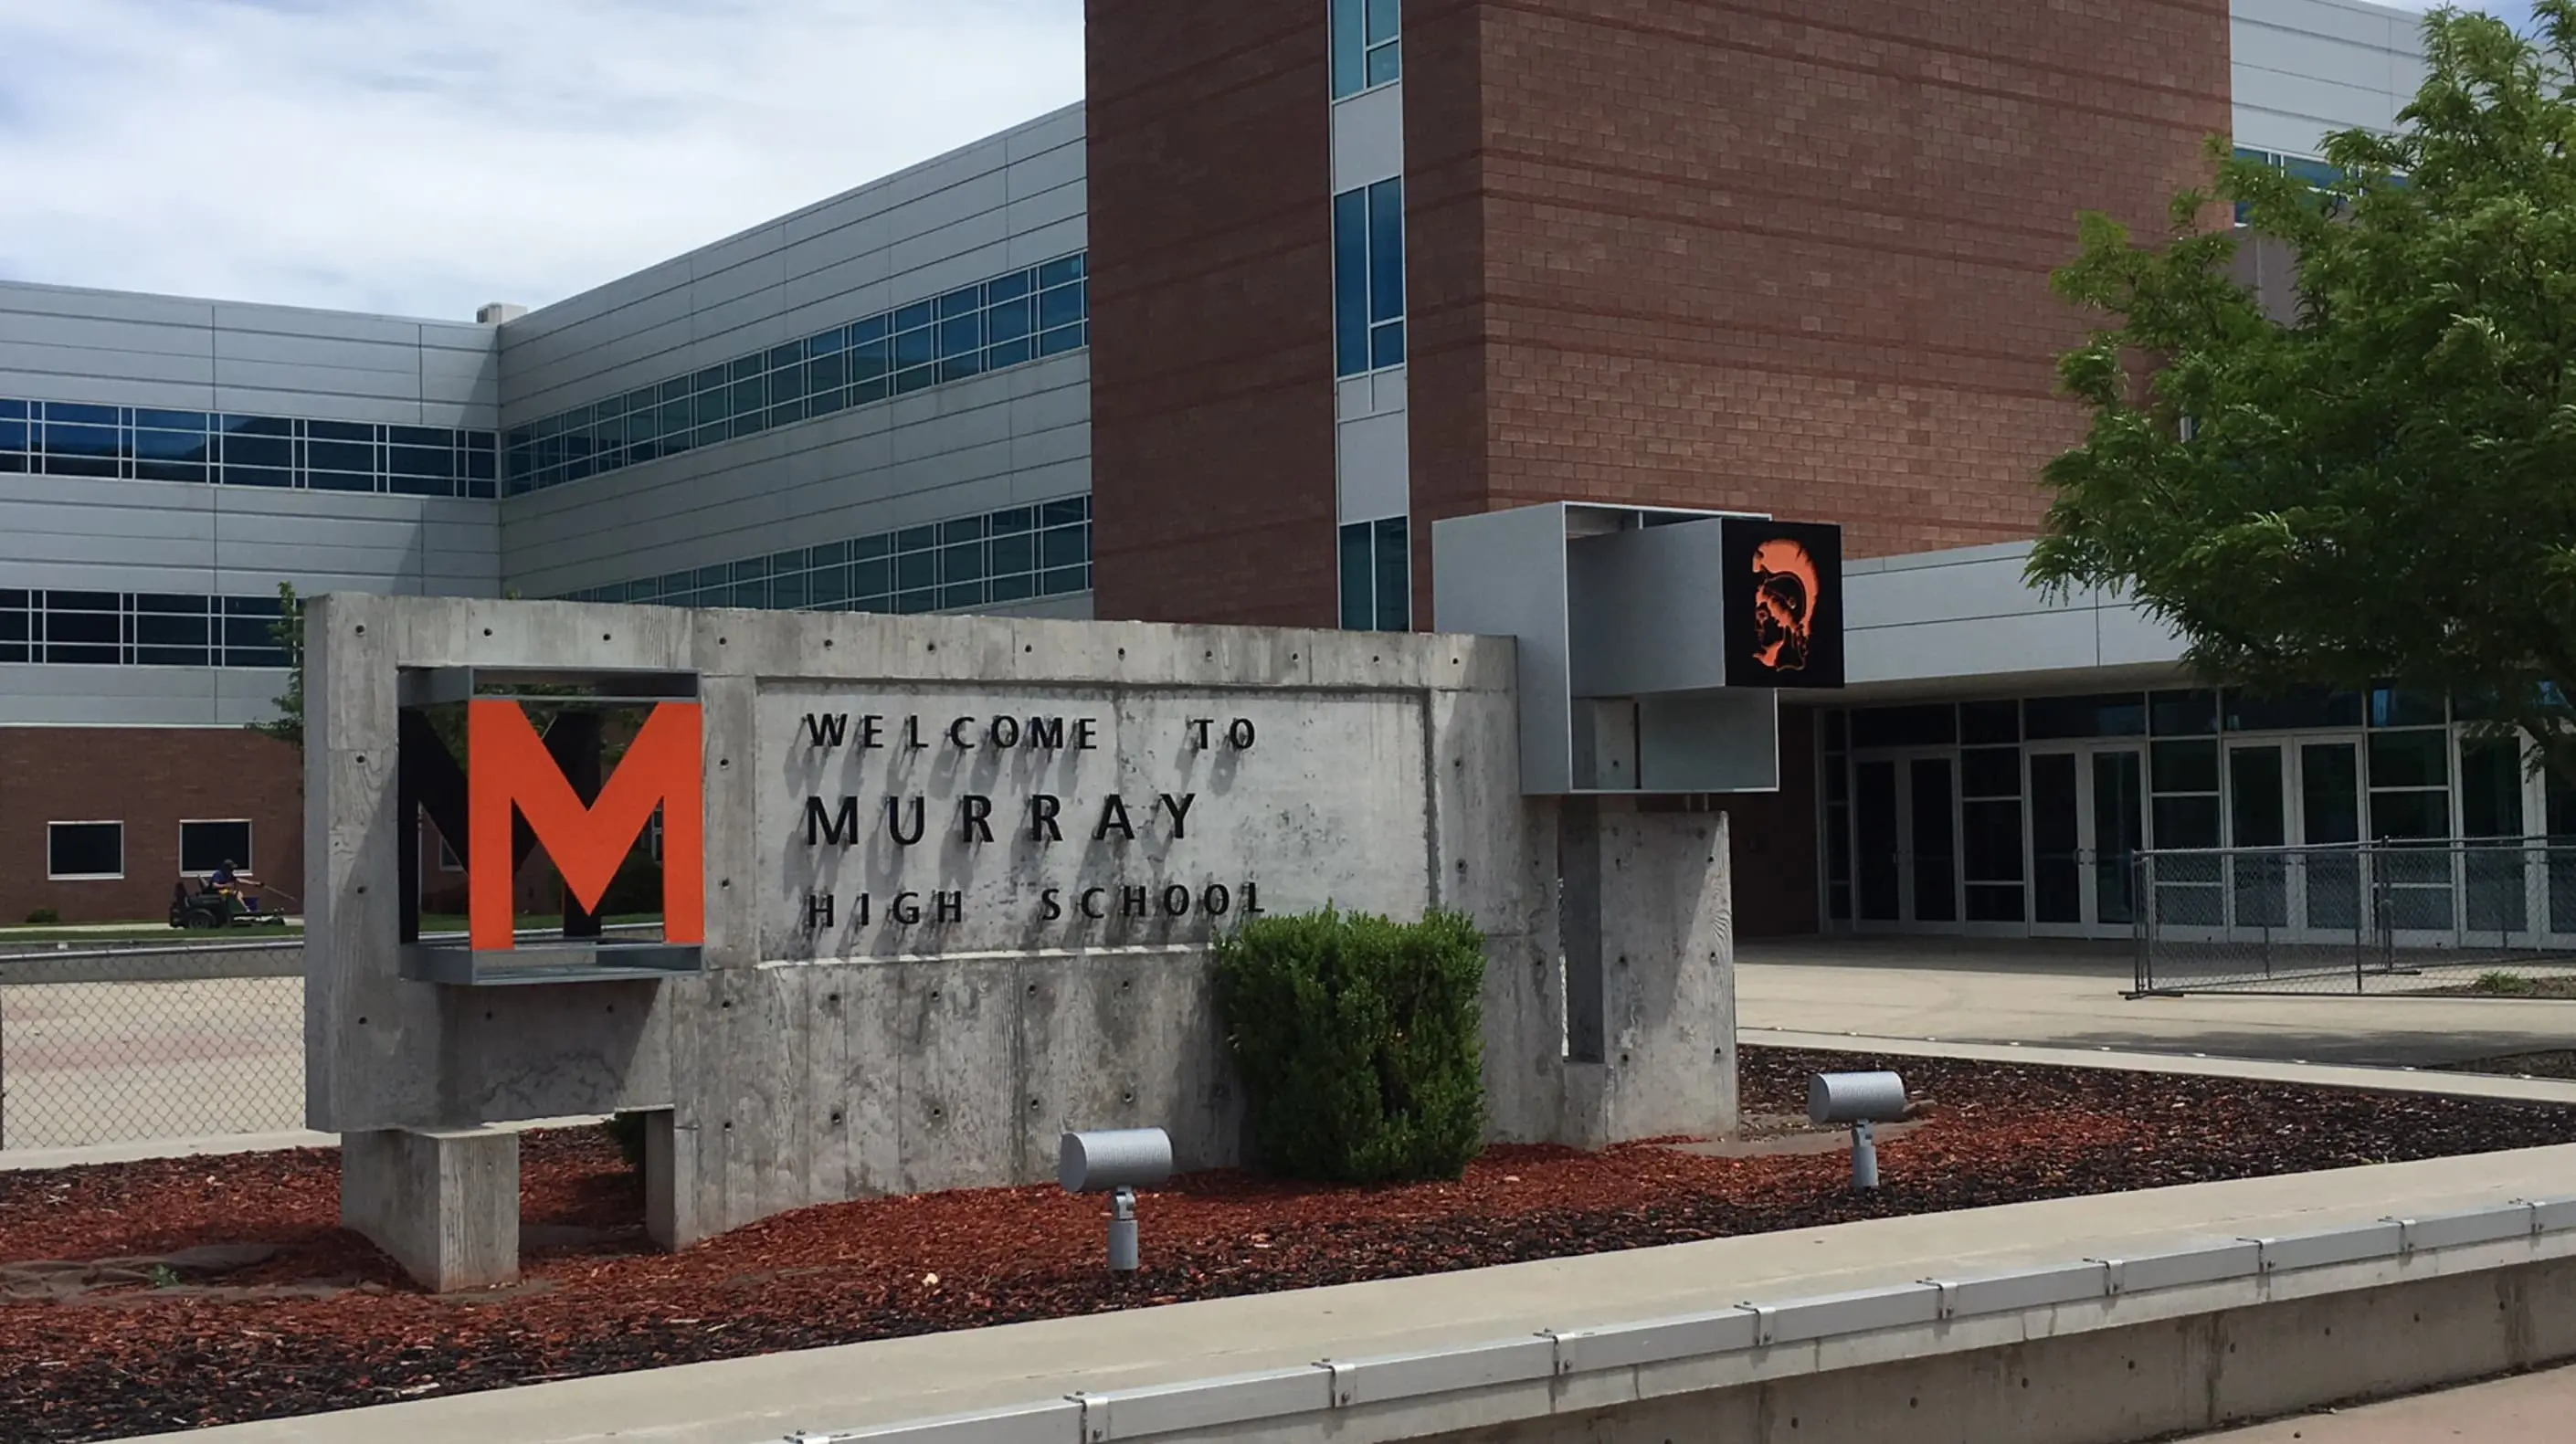 Front view of Murray Highschool with their welcome sign in view.